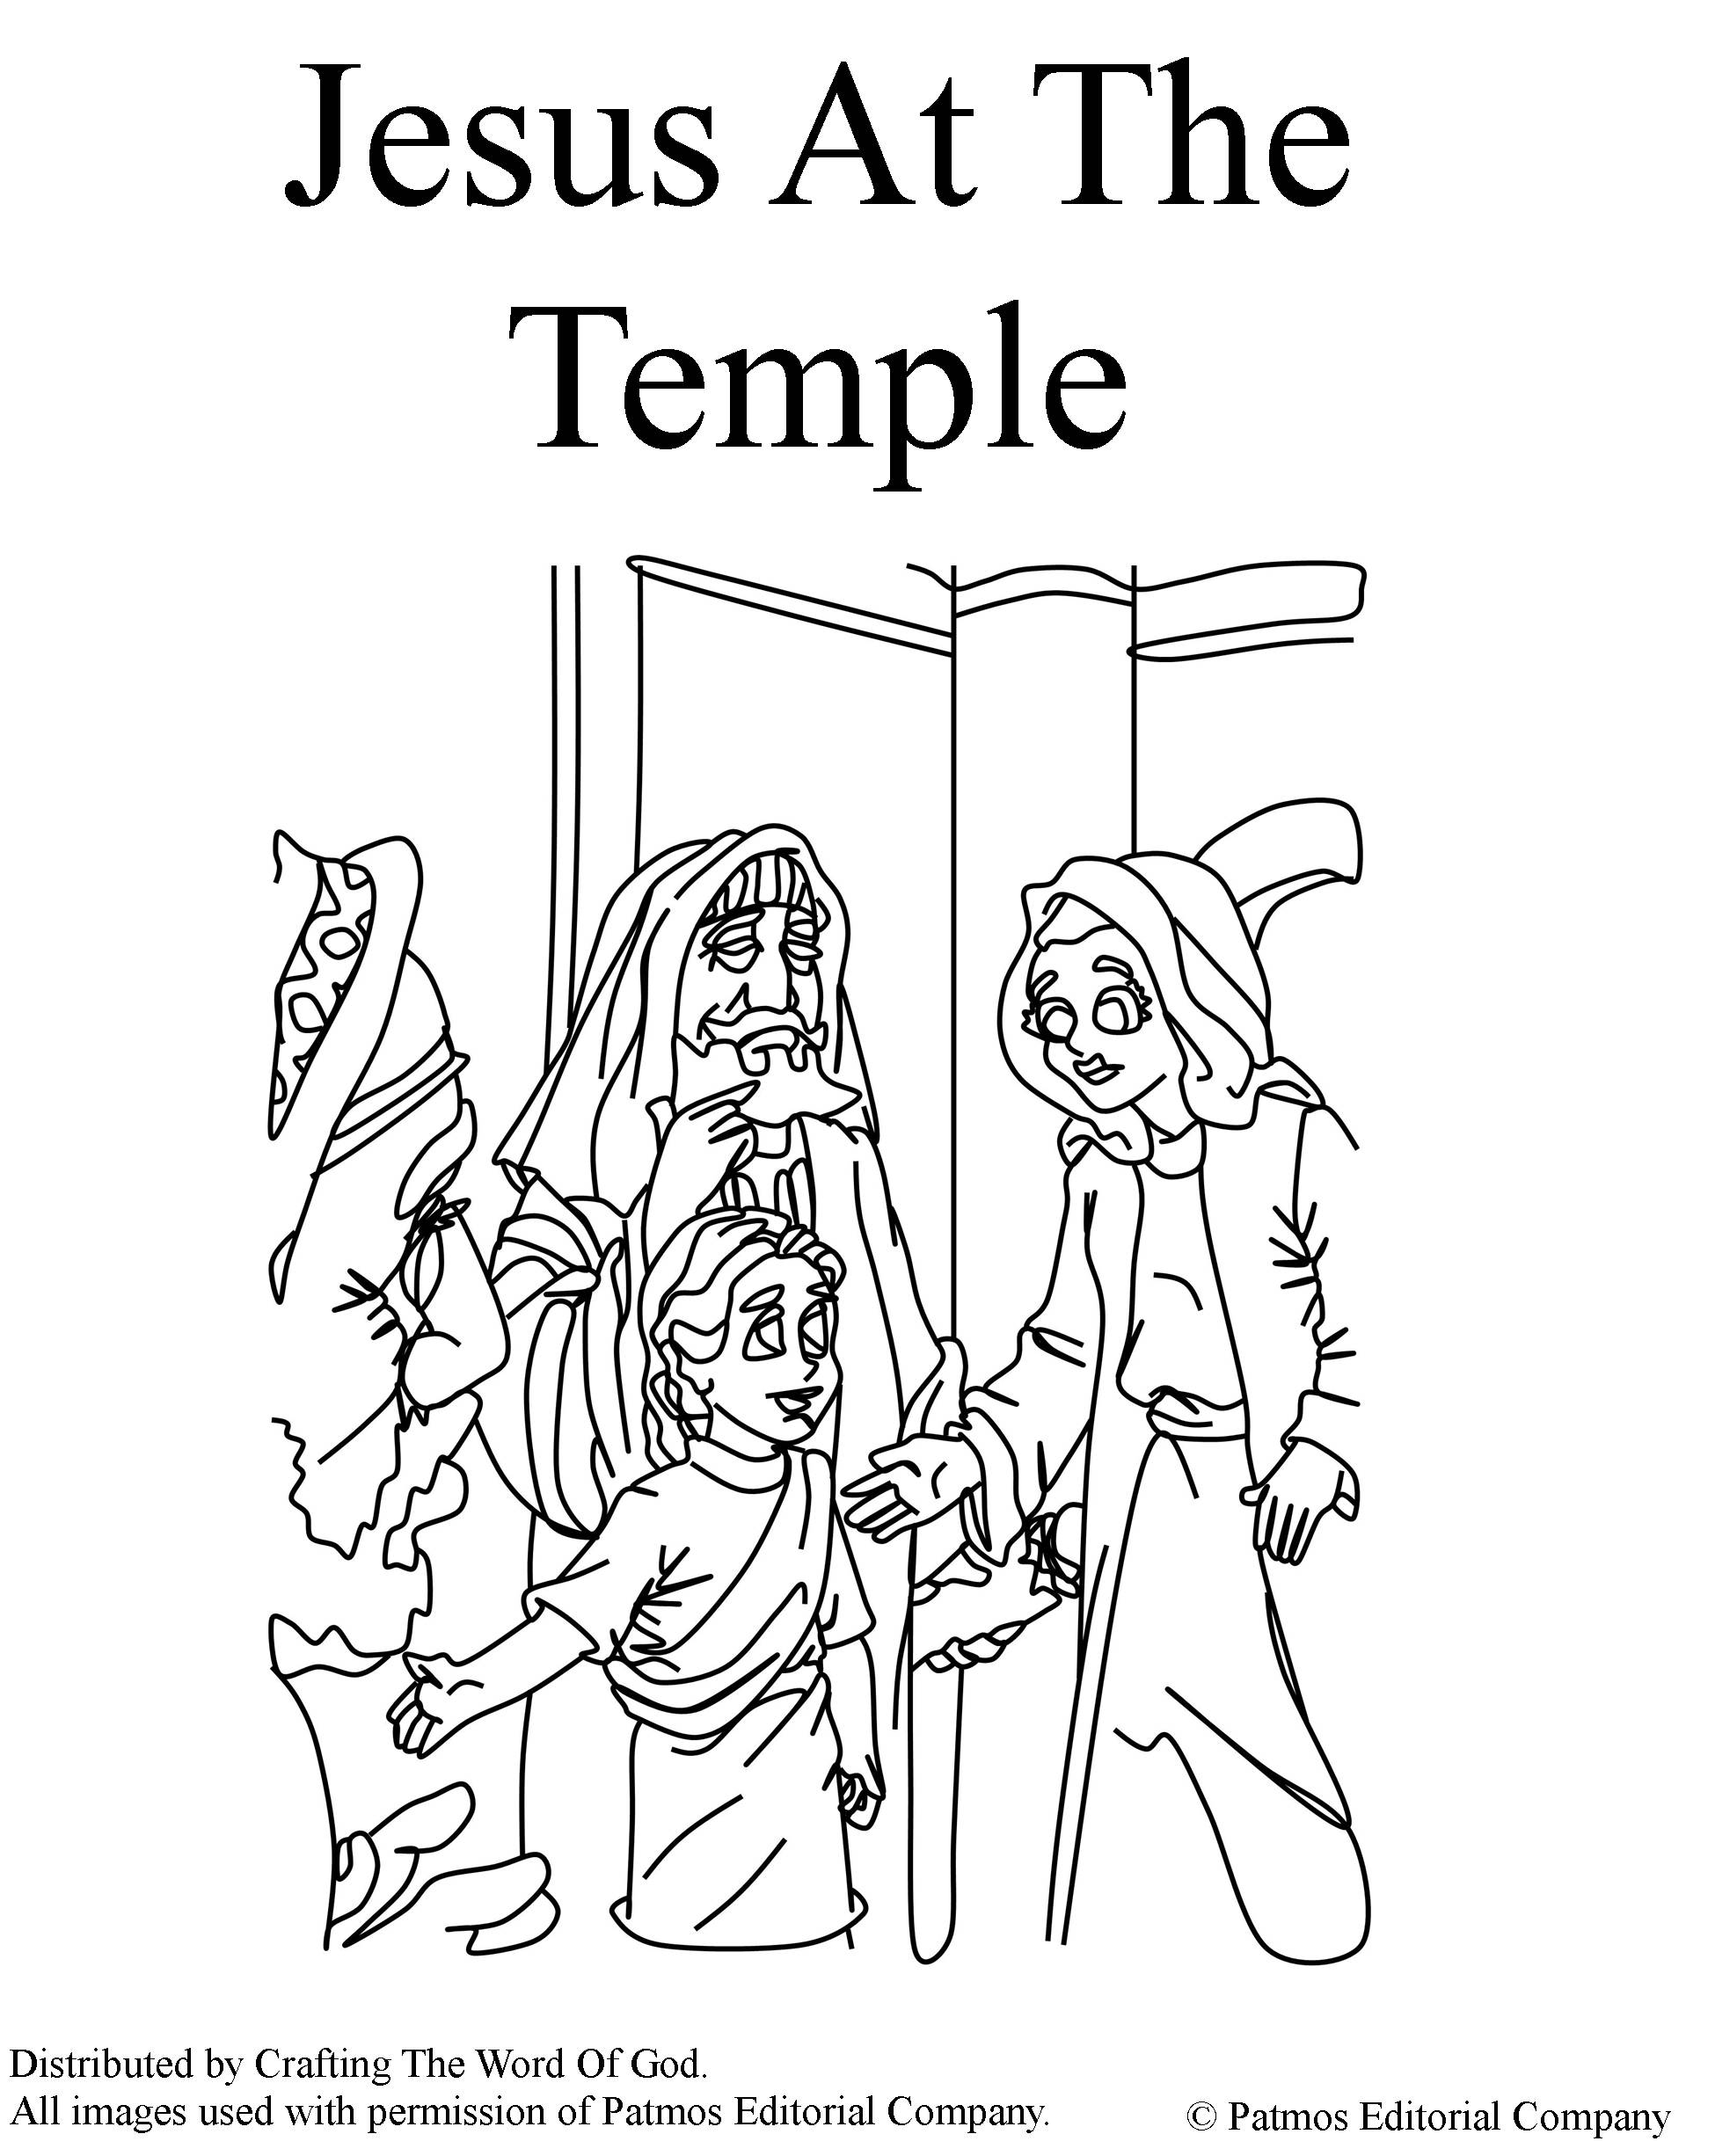 Jesus At The Temple- Coloring Page « Crafting The Word Of God